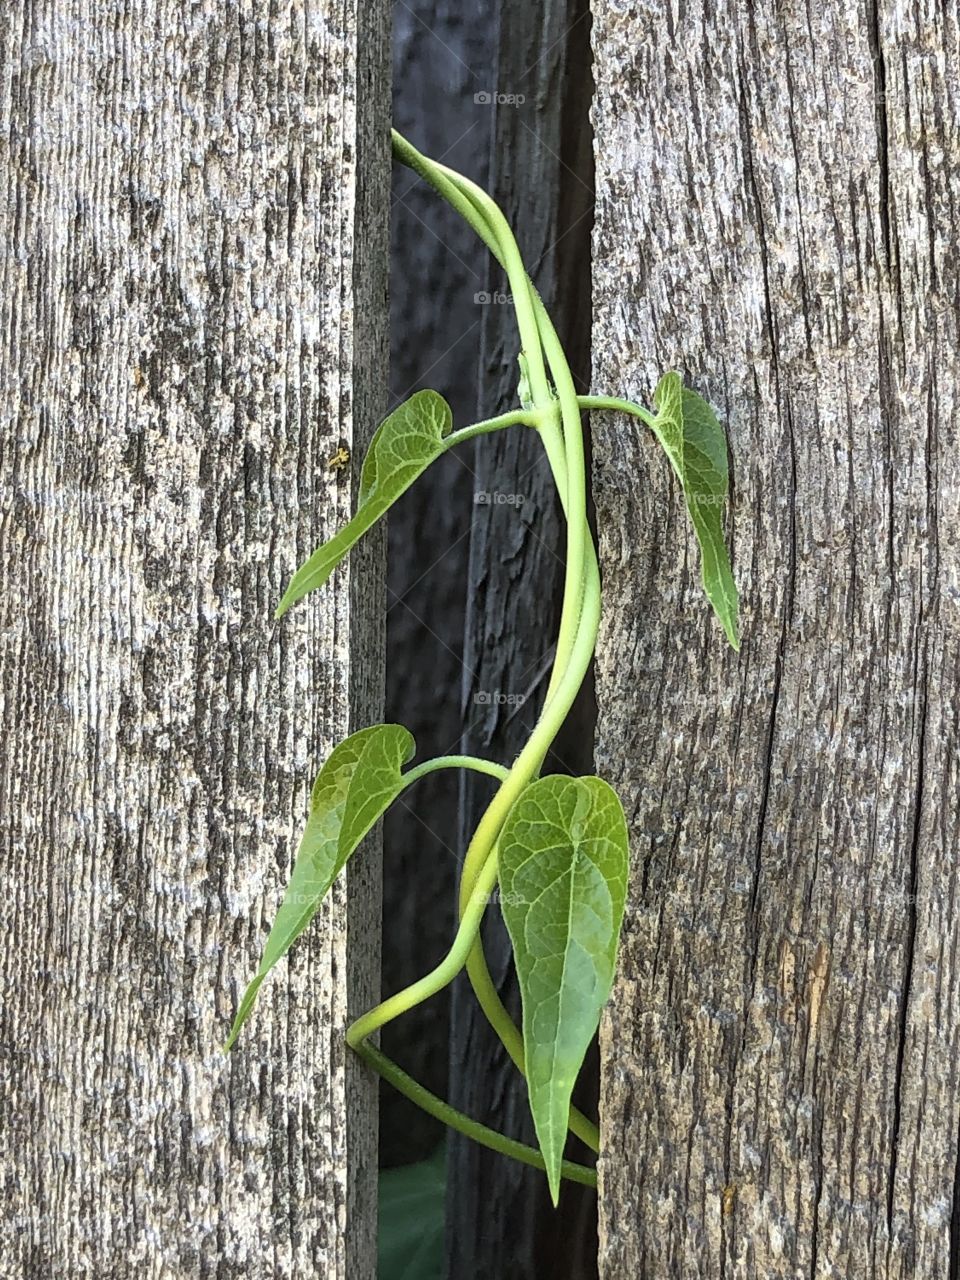 Plant vine showing through the fence